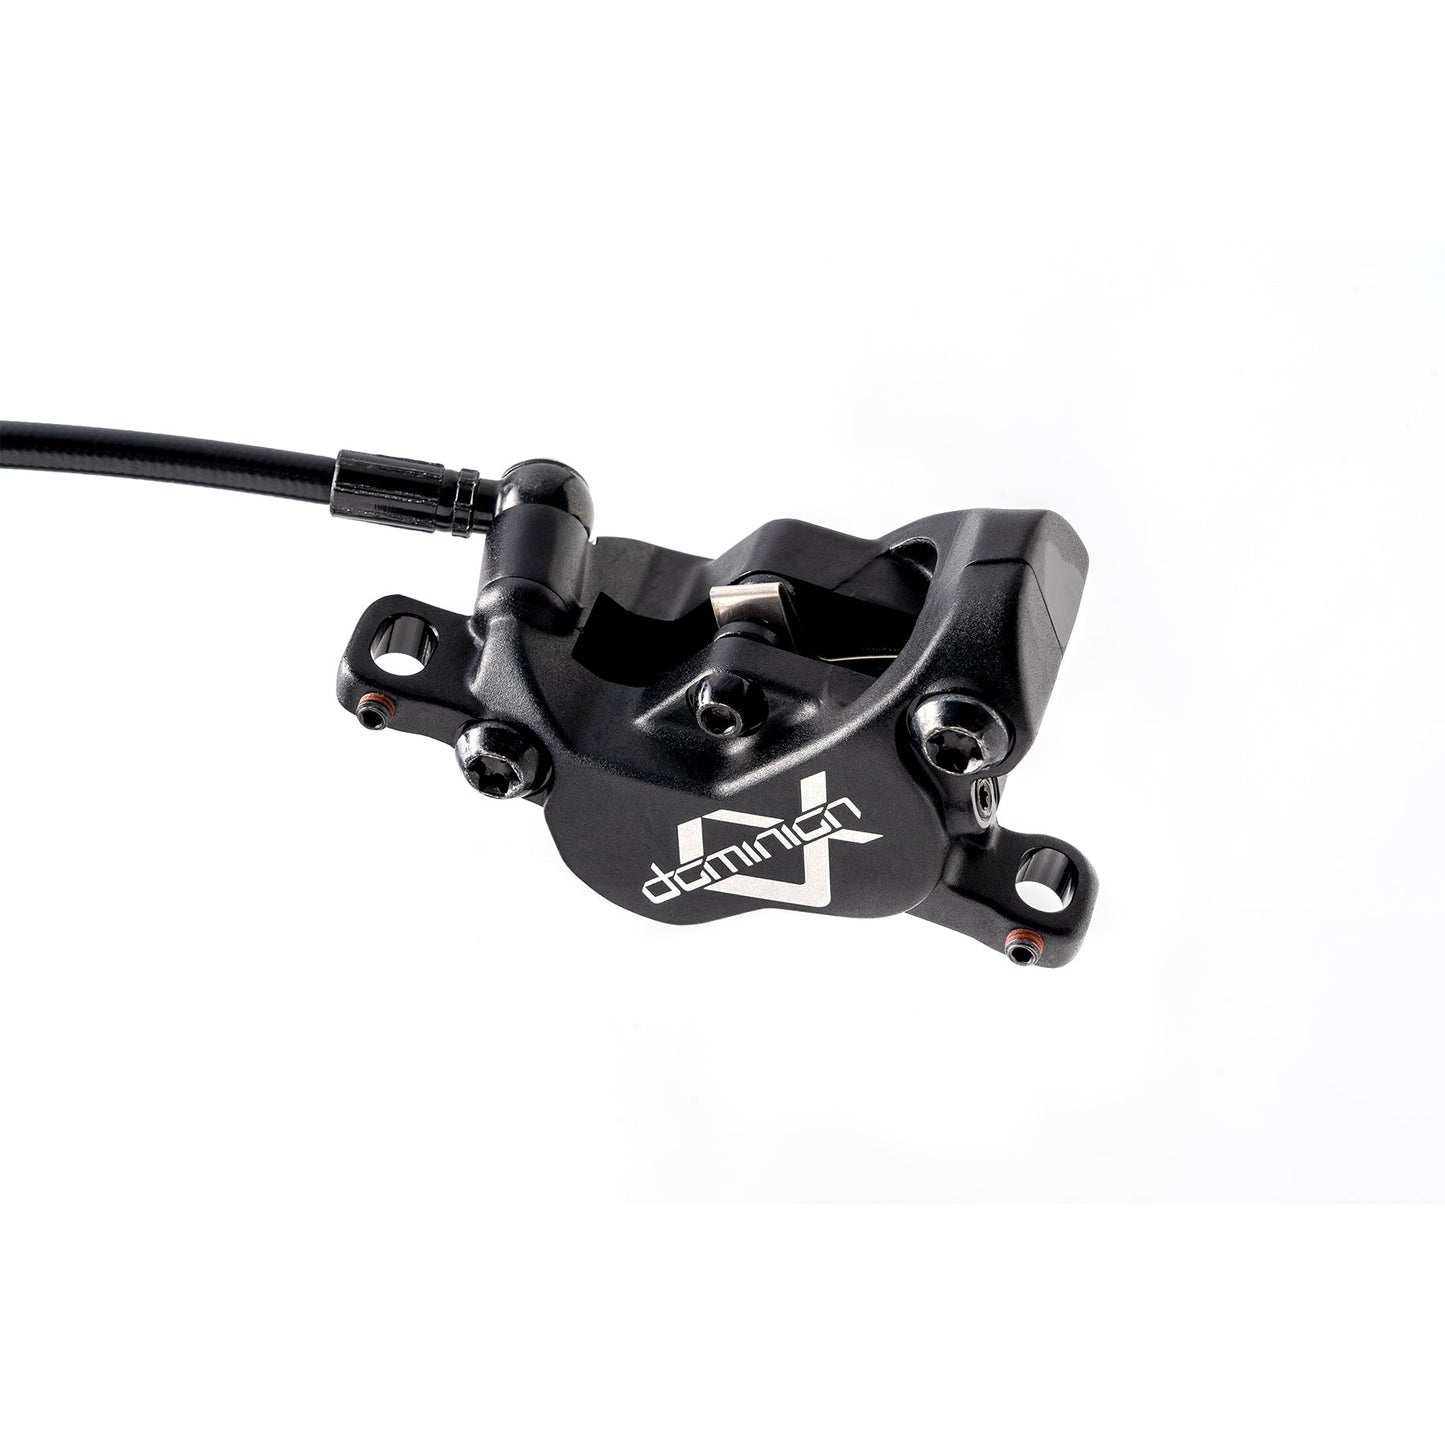 Hayes Dominion A4 Disc Brake and Lever [Stealth Black/Grey]